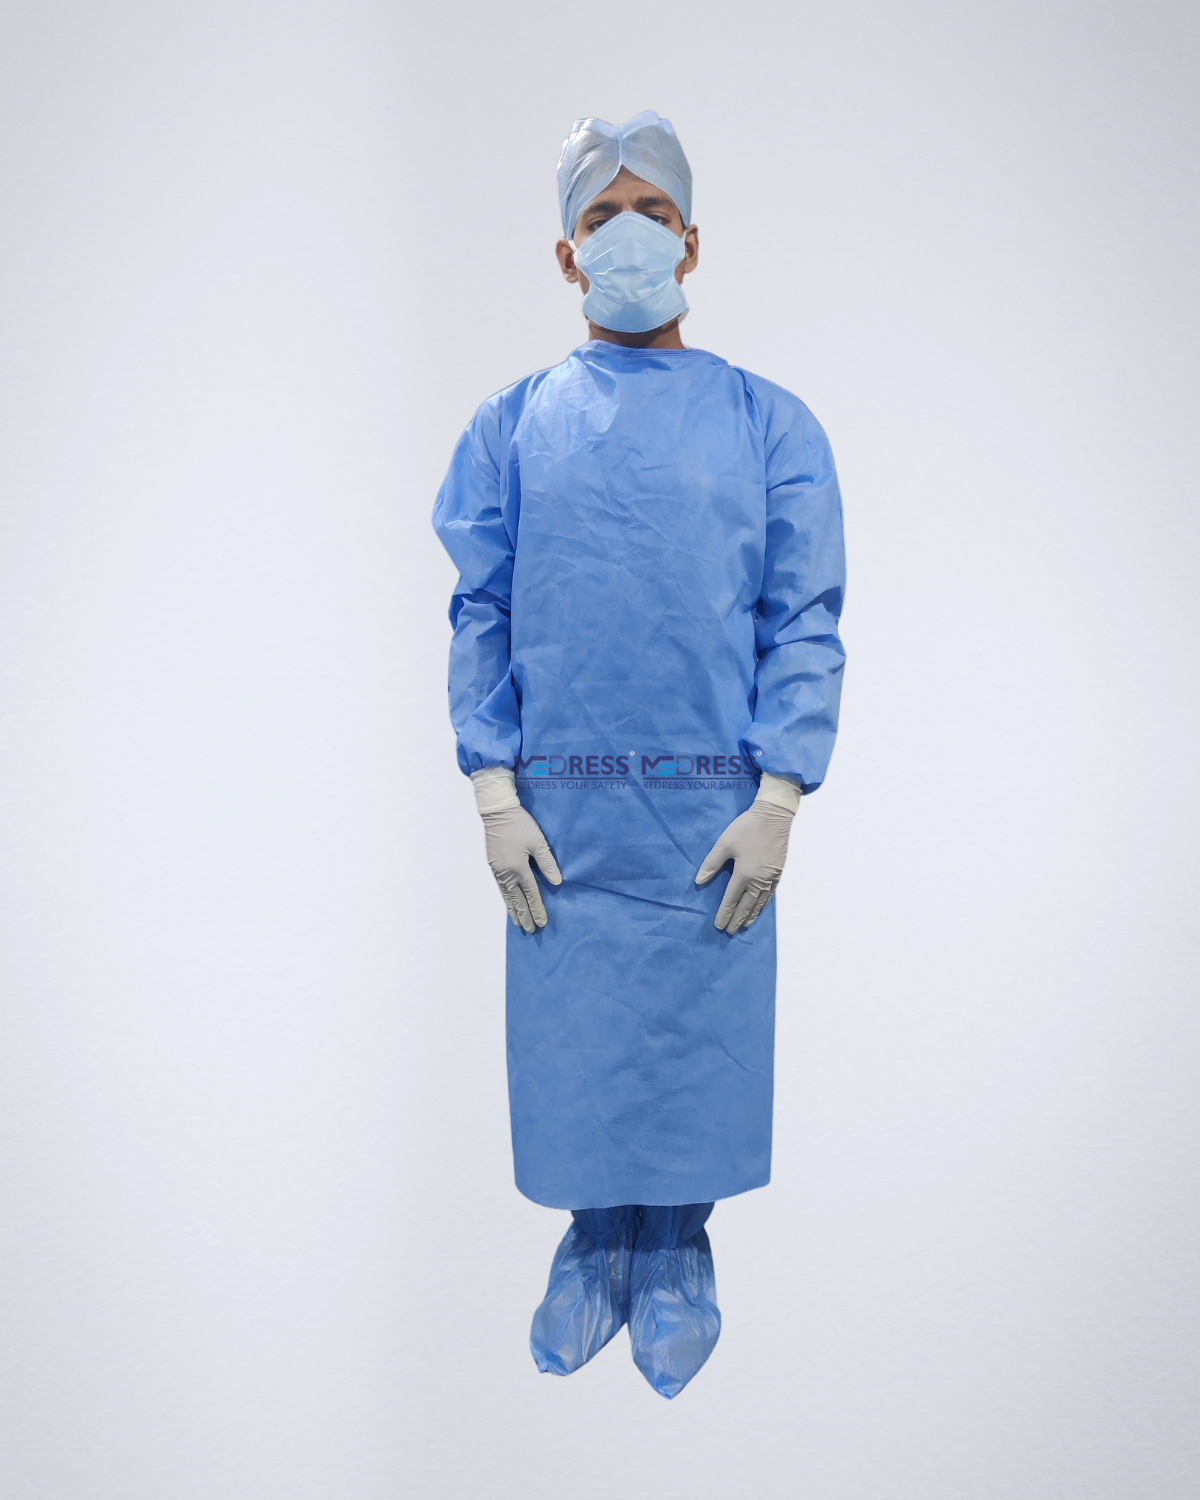 IndoSurgicals Surgeon Gown Online Price, Specification & Images